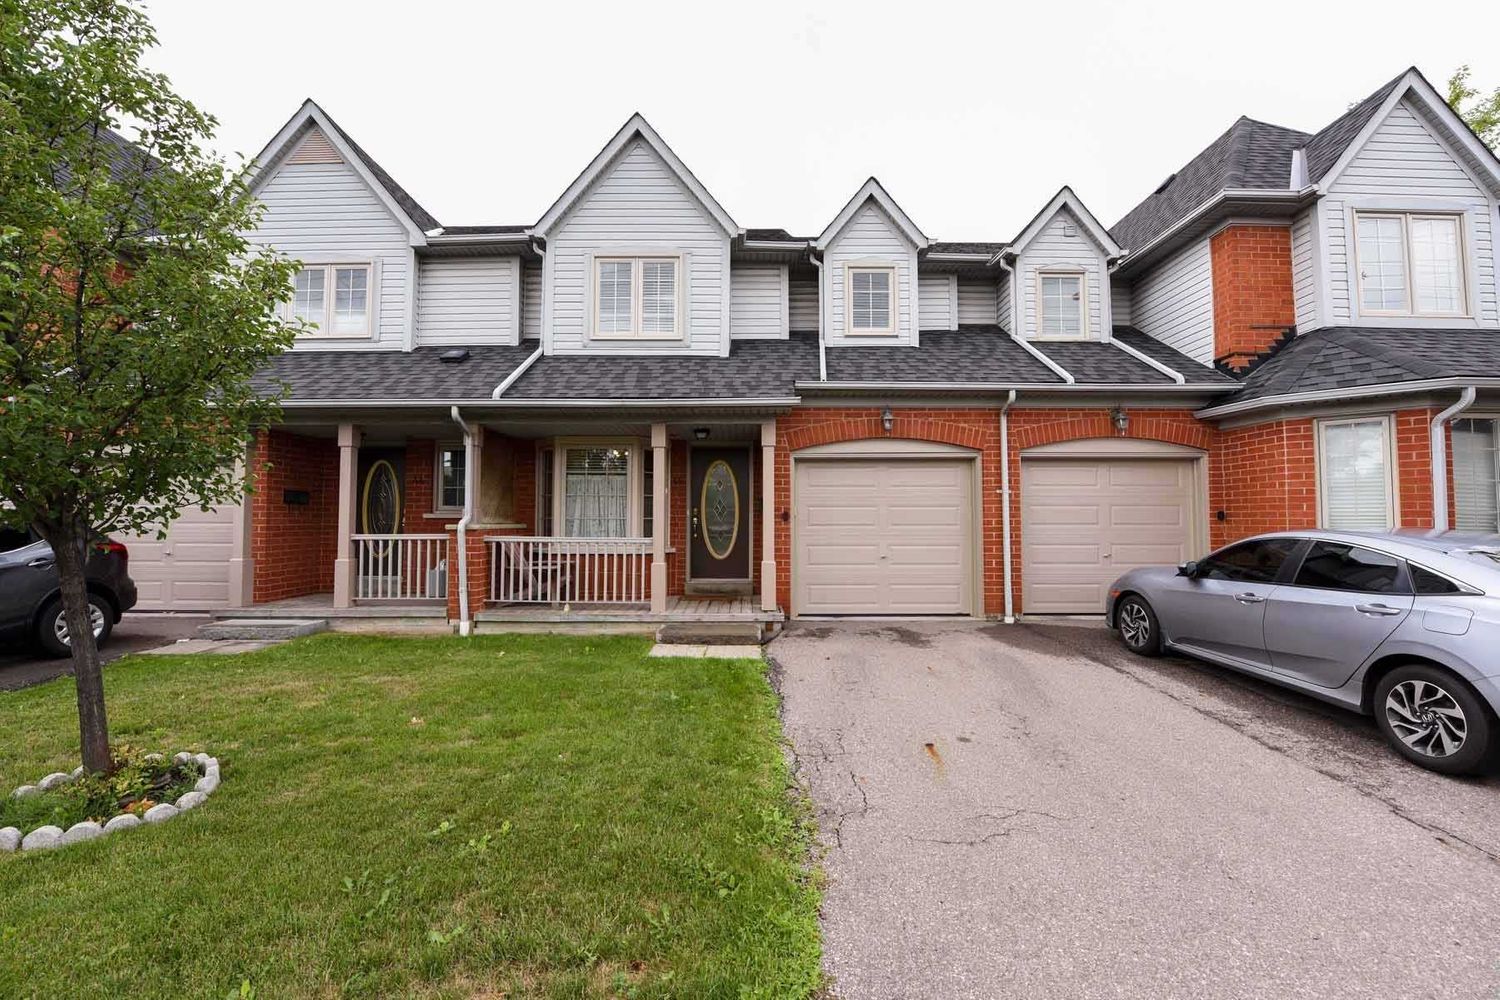 5223 Fairford Crescent. 5223 Fairford Cres Townhomes is located in  Mississauga, Toronto - image #1 of 2